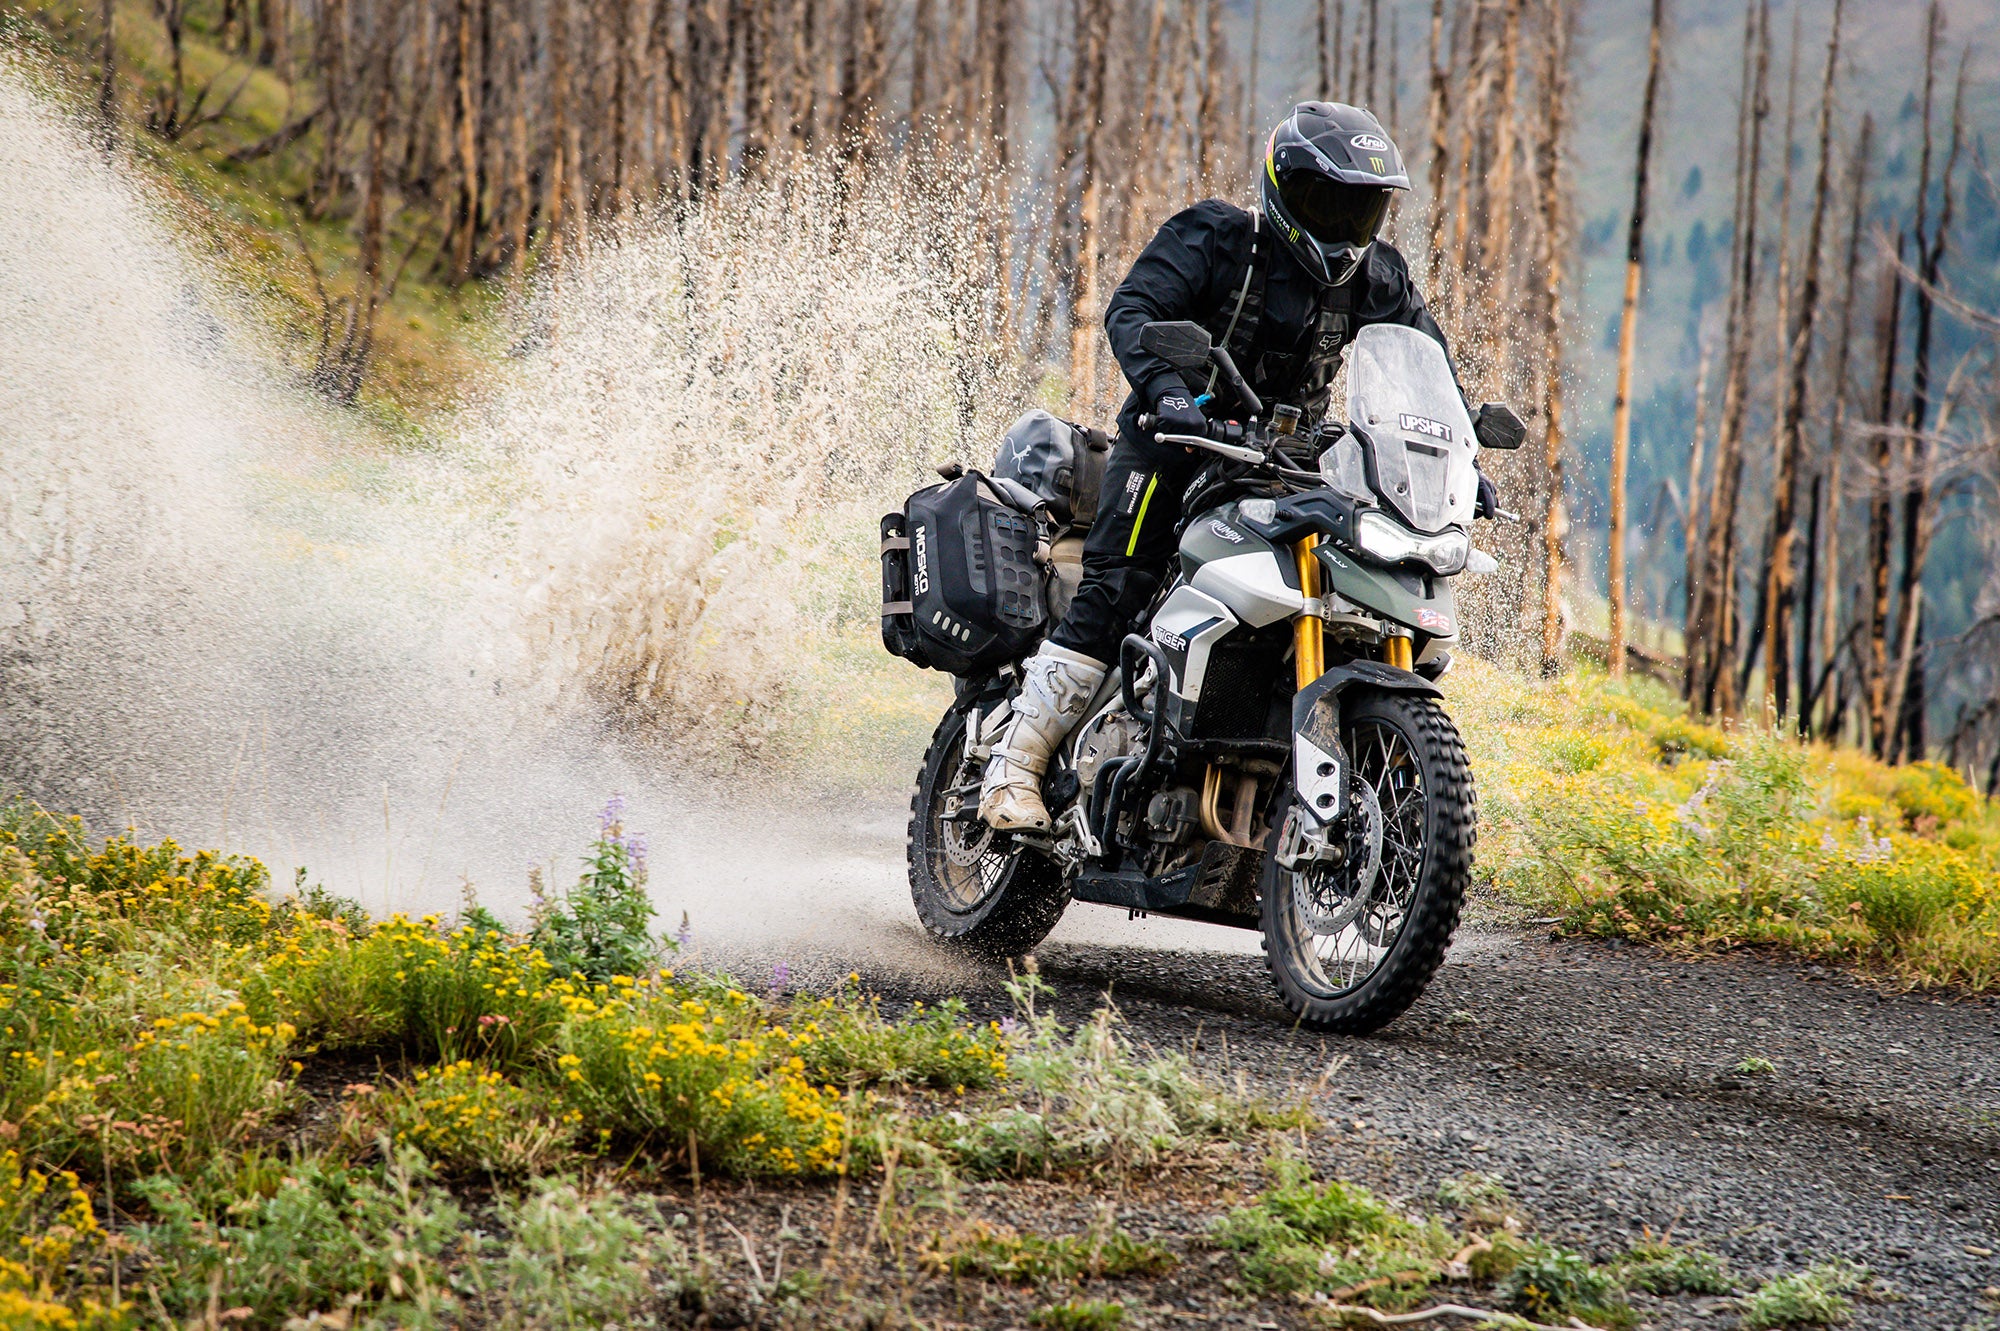 RC'S SUMMER ADVENTURE 2021 - RICKY CARMICHAEL RIDES TRIUMPH TIGERS IN IDAHO'S BACKCOUNTRY